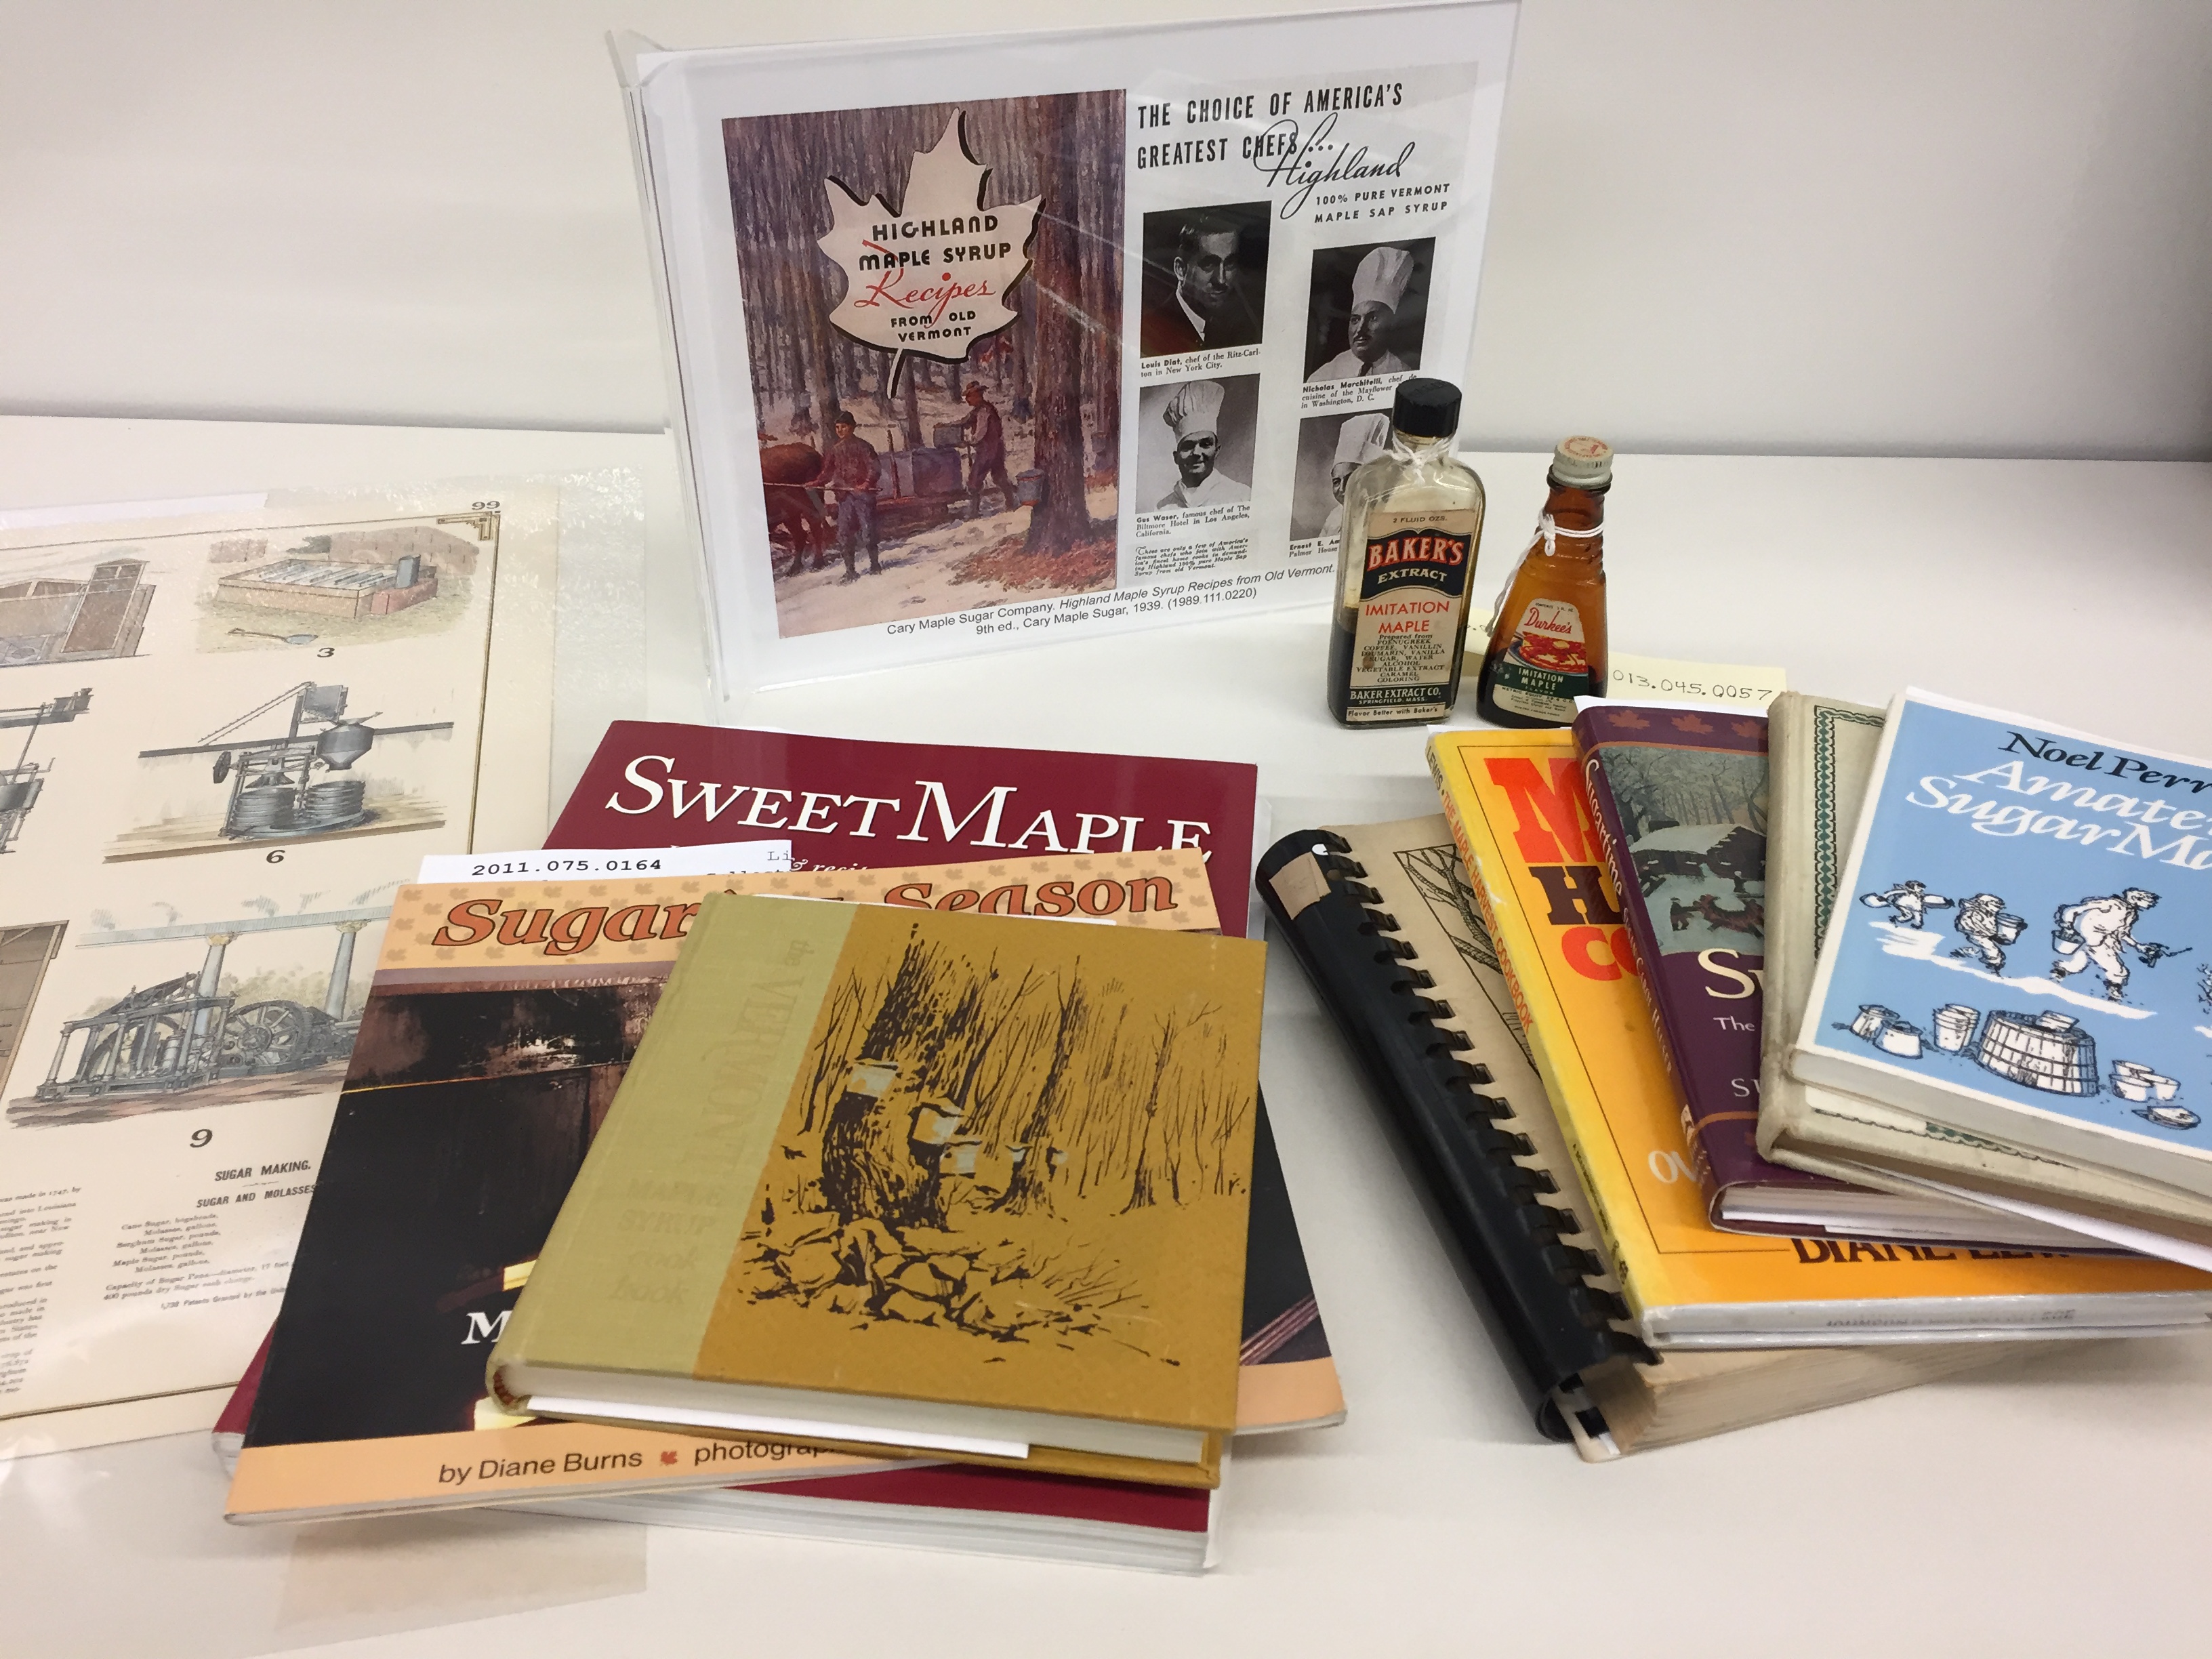 Display of archival cookbooks related to maple sugar